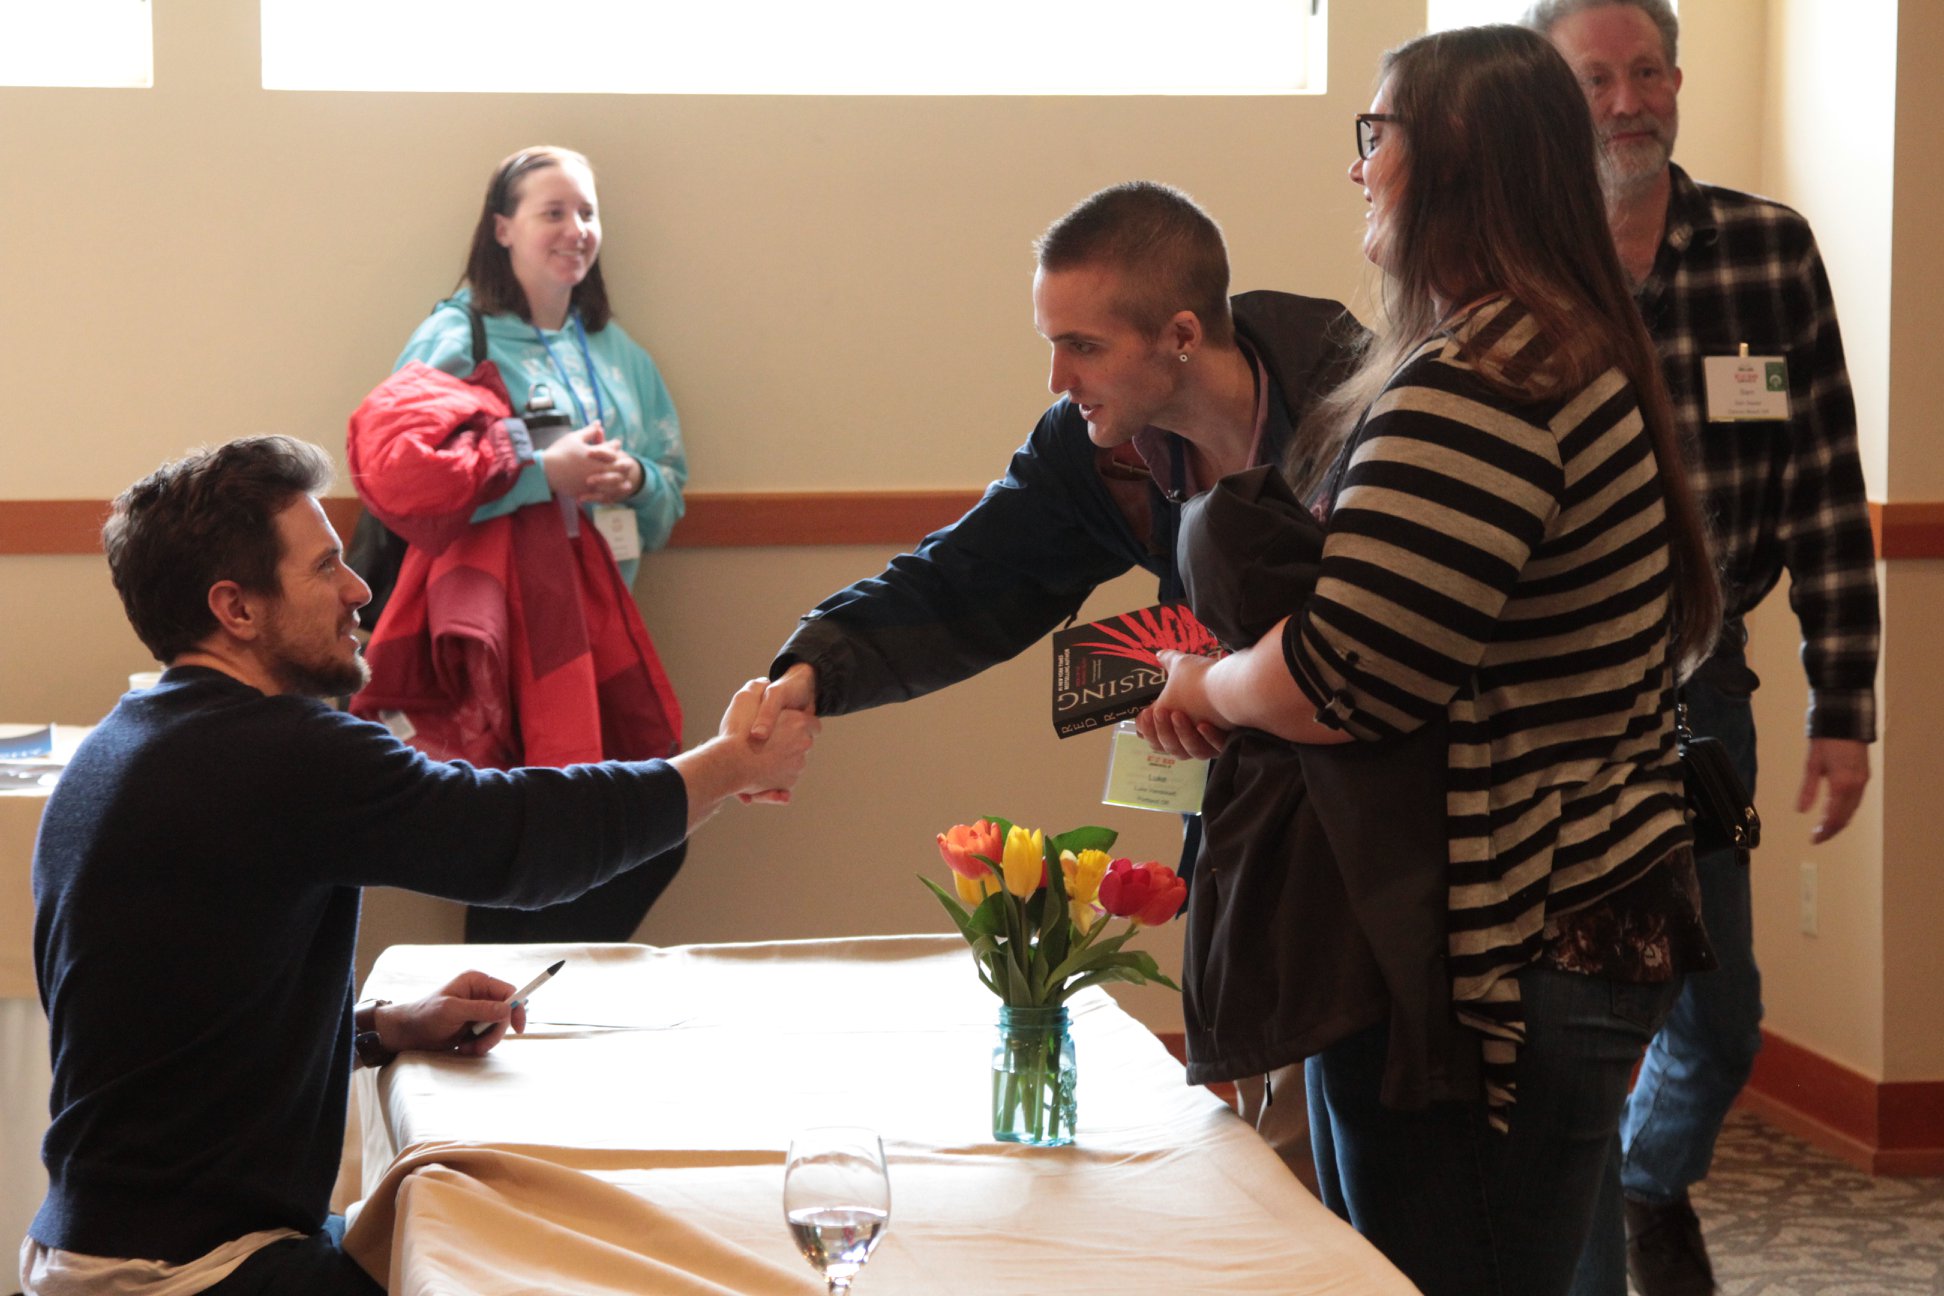 A reader shaking an author's hand over a book signing table.